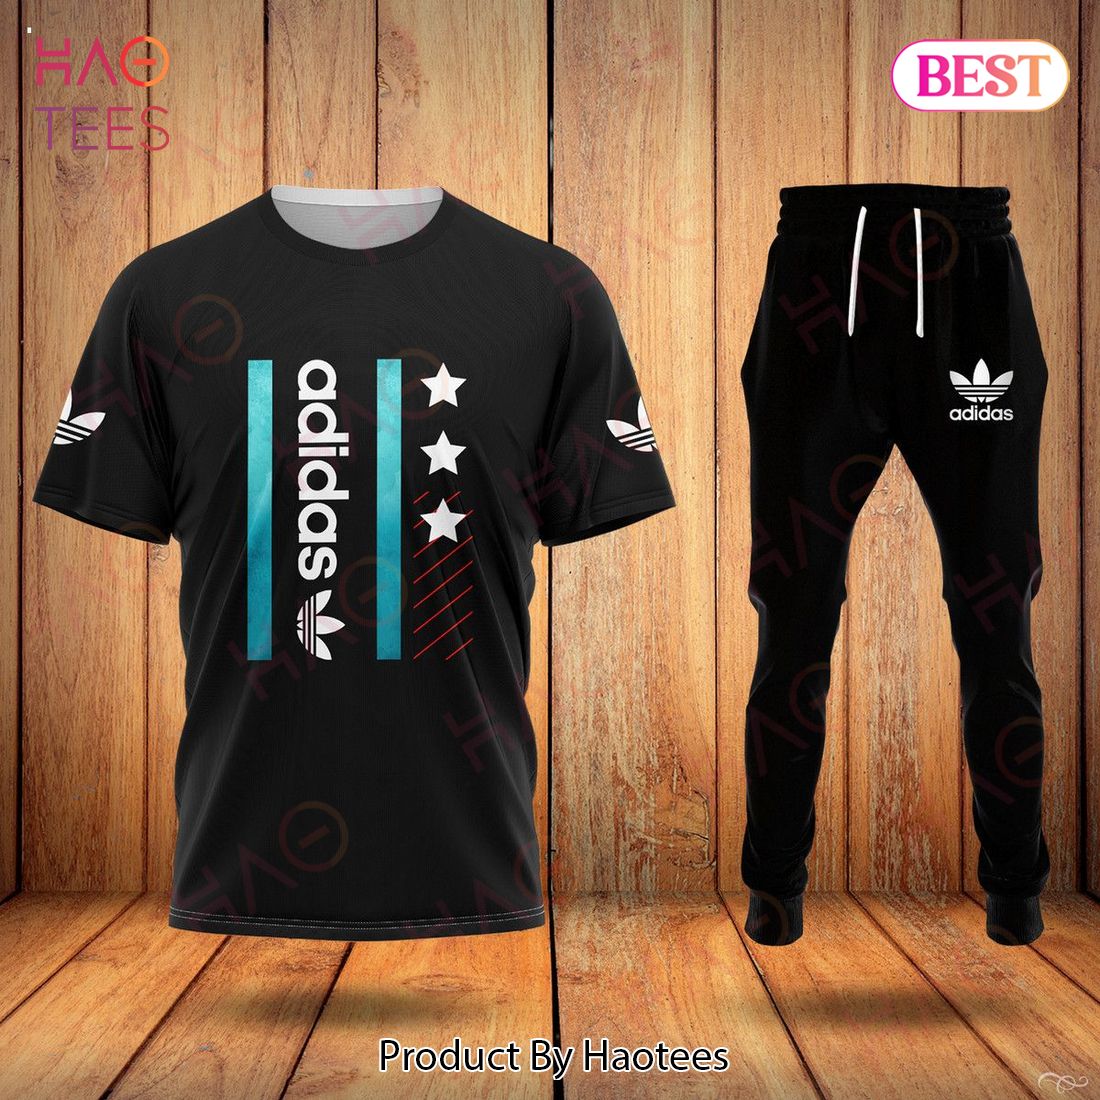 Adidas Black T-Shirt And Pants Luxury Brand Limited Edition